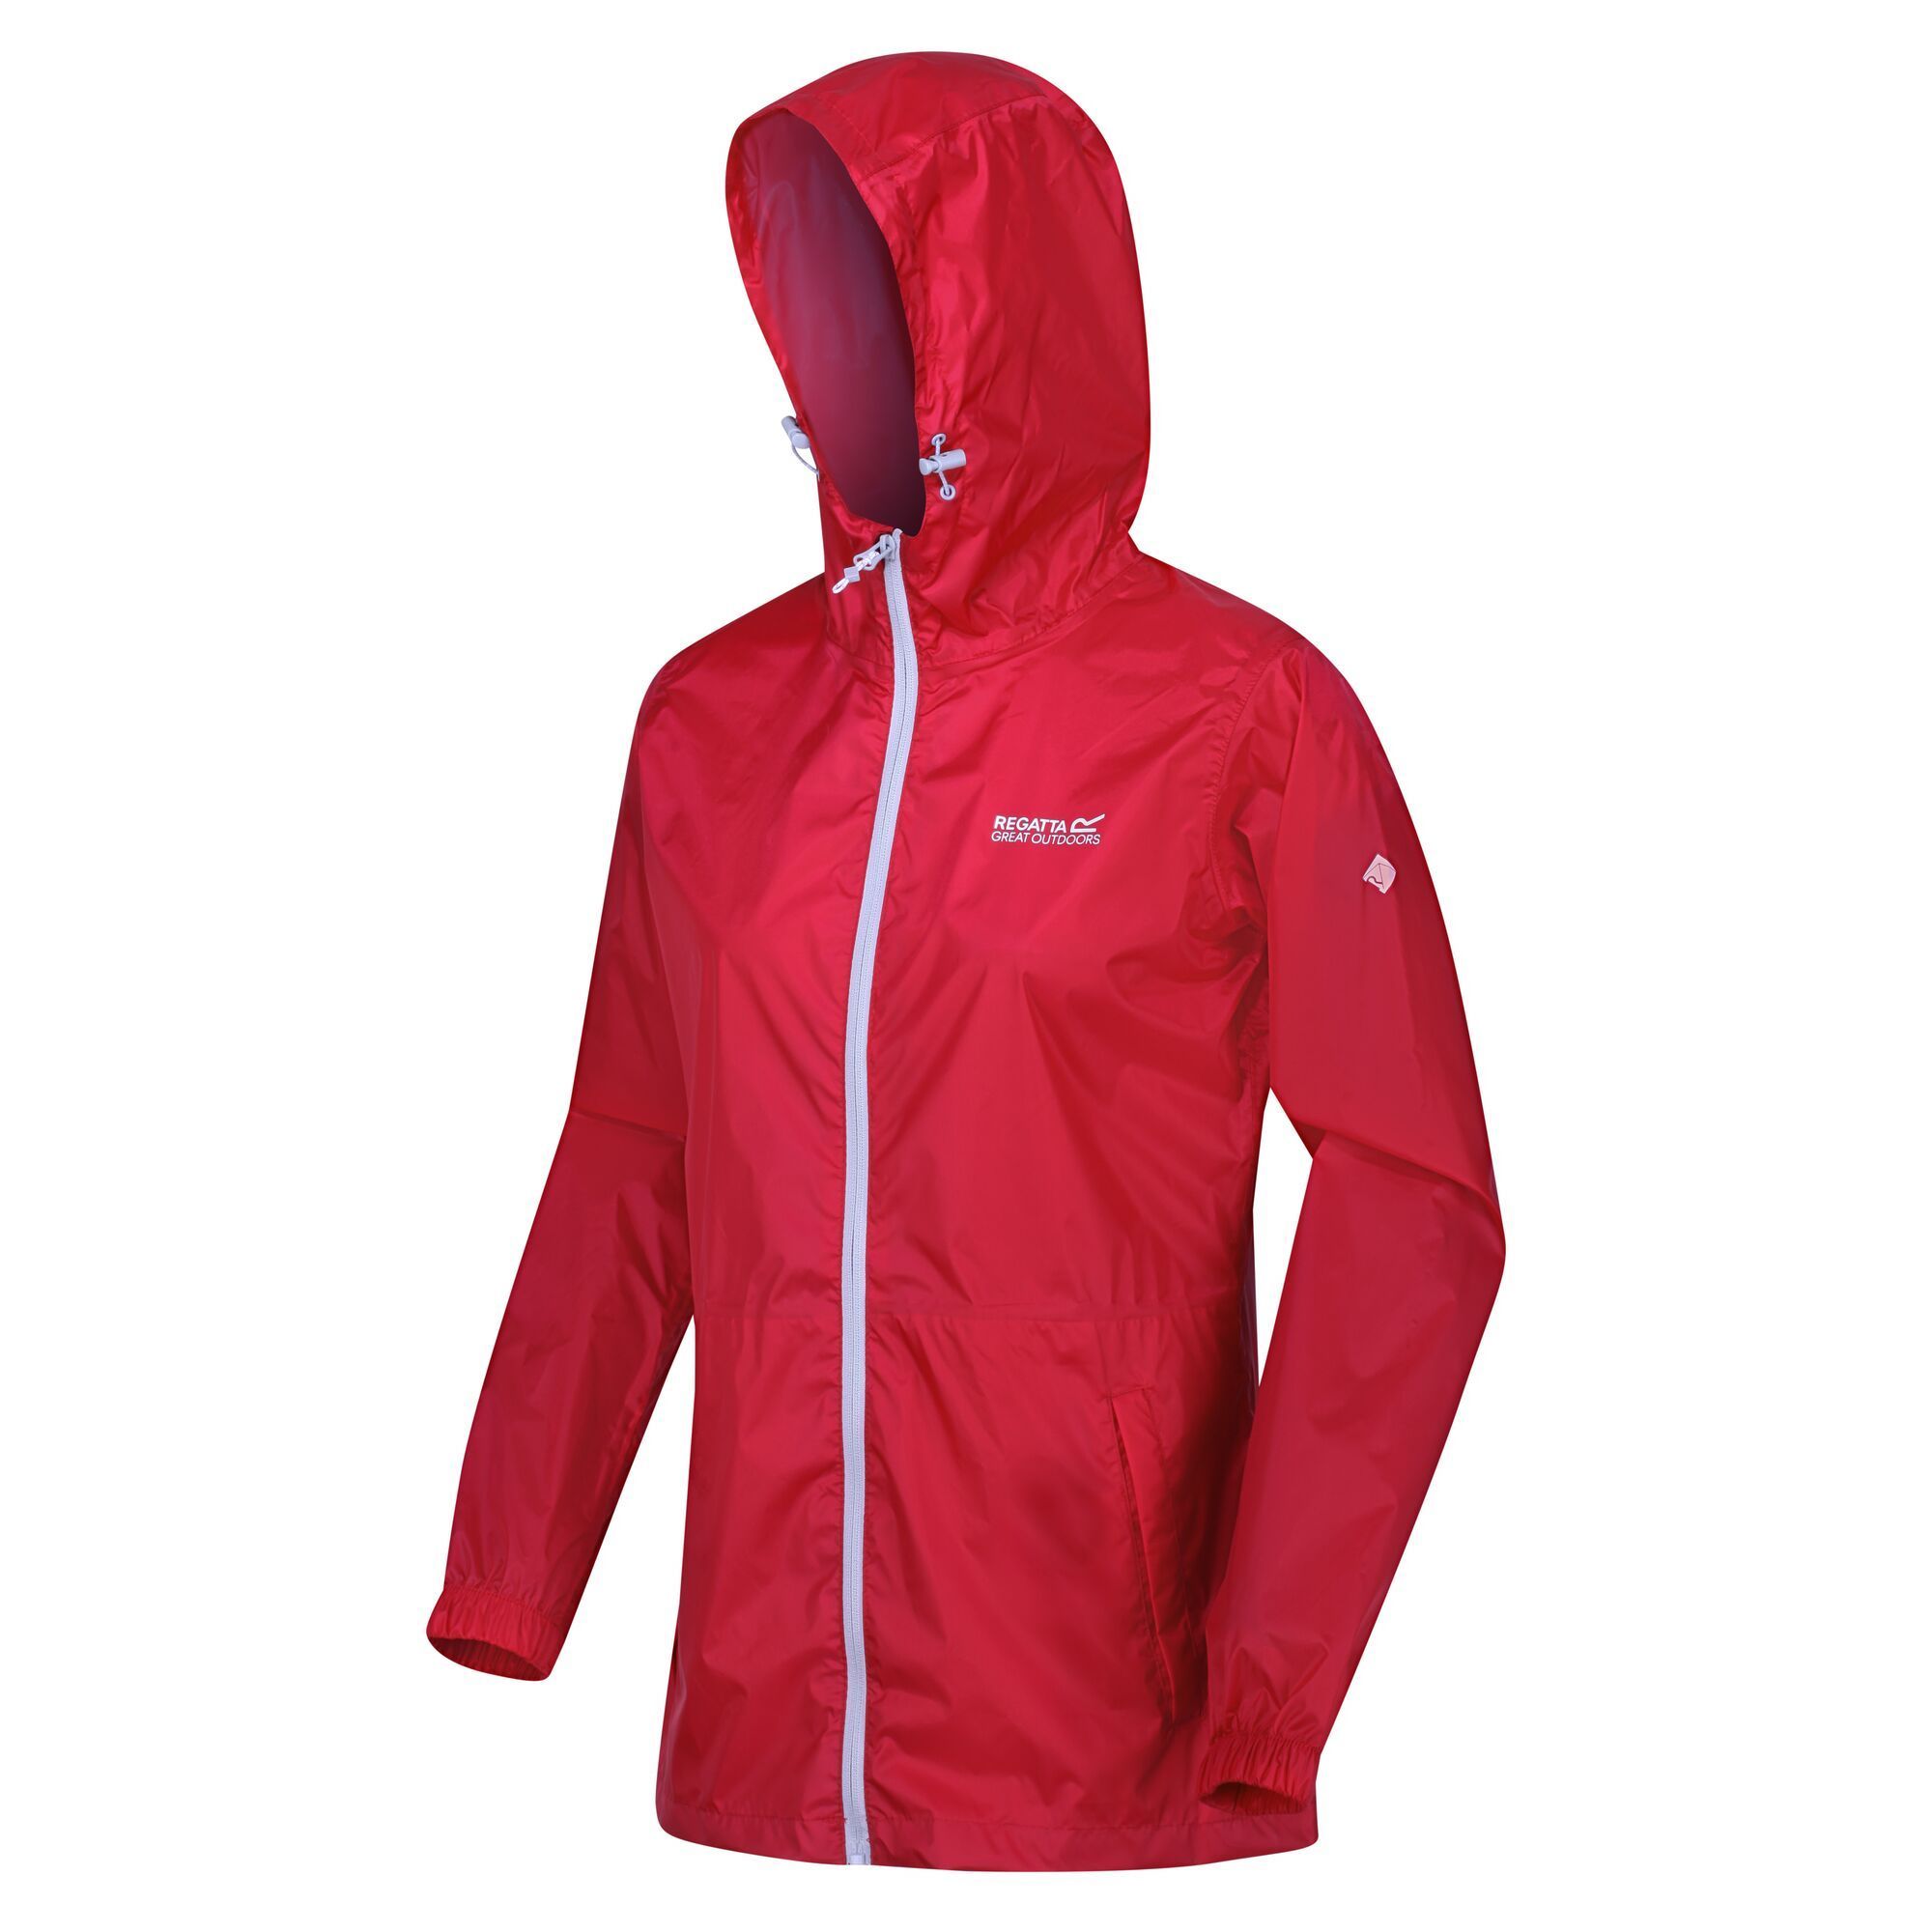 100% Polyamide. Waterproof hooded jacket made from lightweight Isolite 5000 fabric. No lining. 2 lower pockets. Ideal for wet weather or as a light layer. Hand wash.